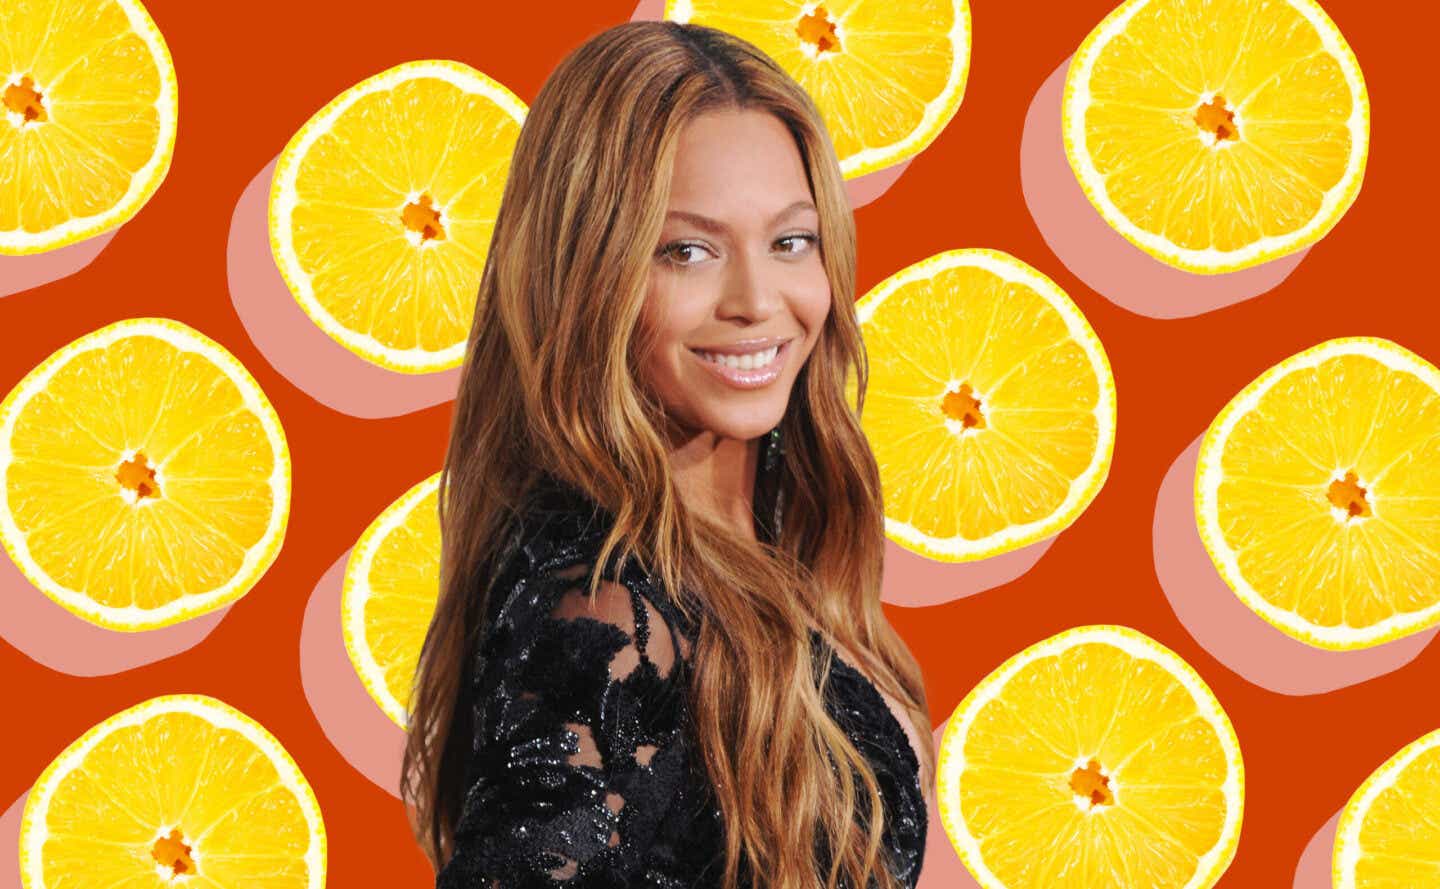 Beyonce in front of a collage of lemons